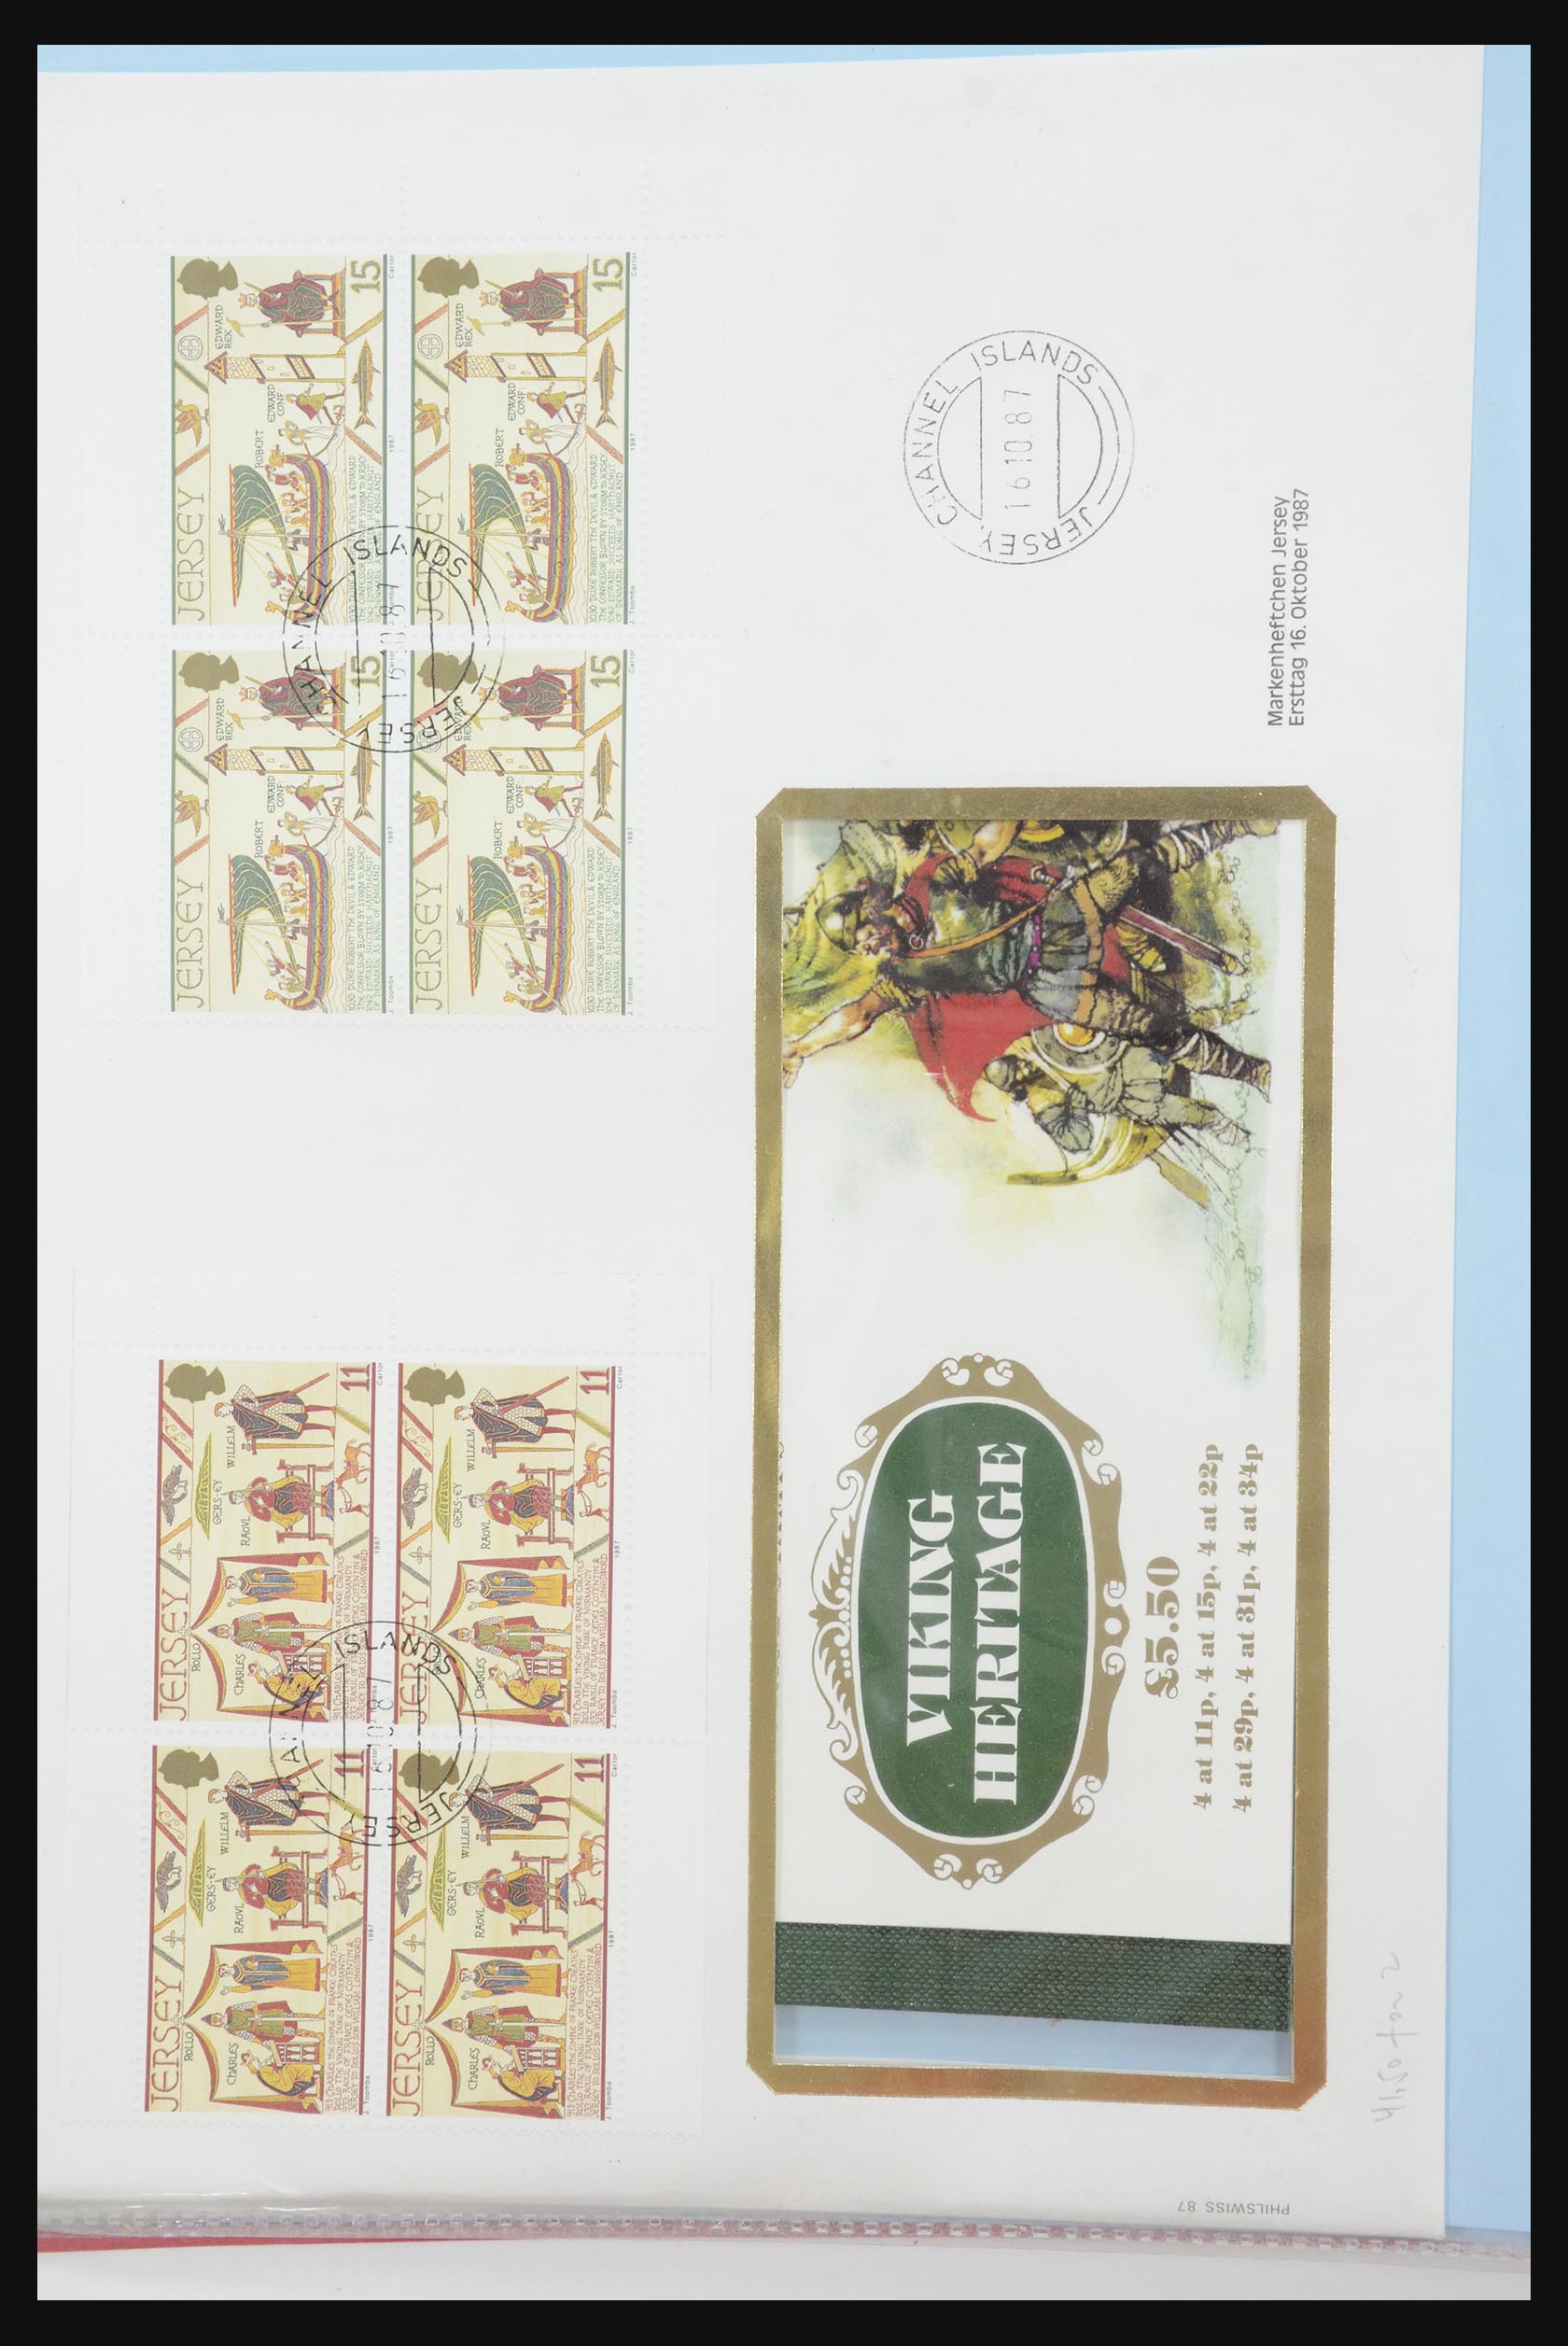 31915 083 - 31915 Western Europe souvenir sheets and stamp booklets on FDC.